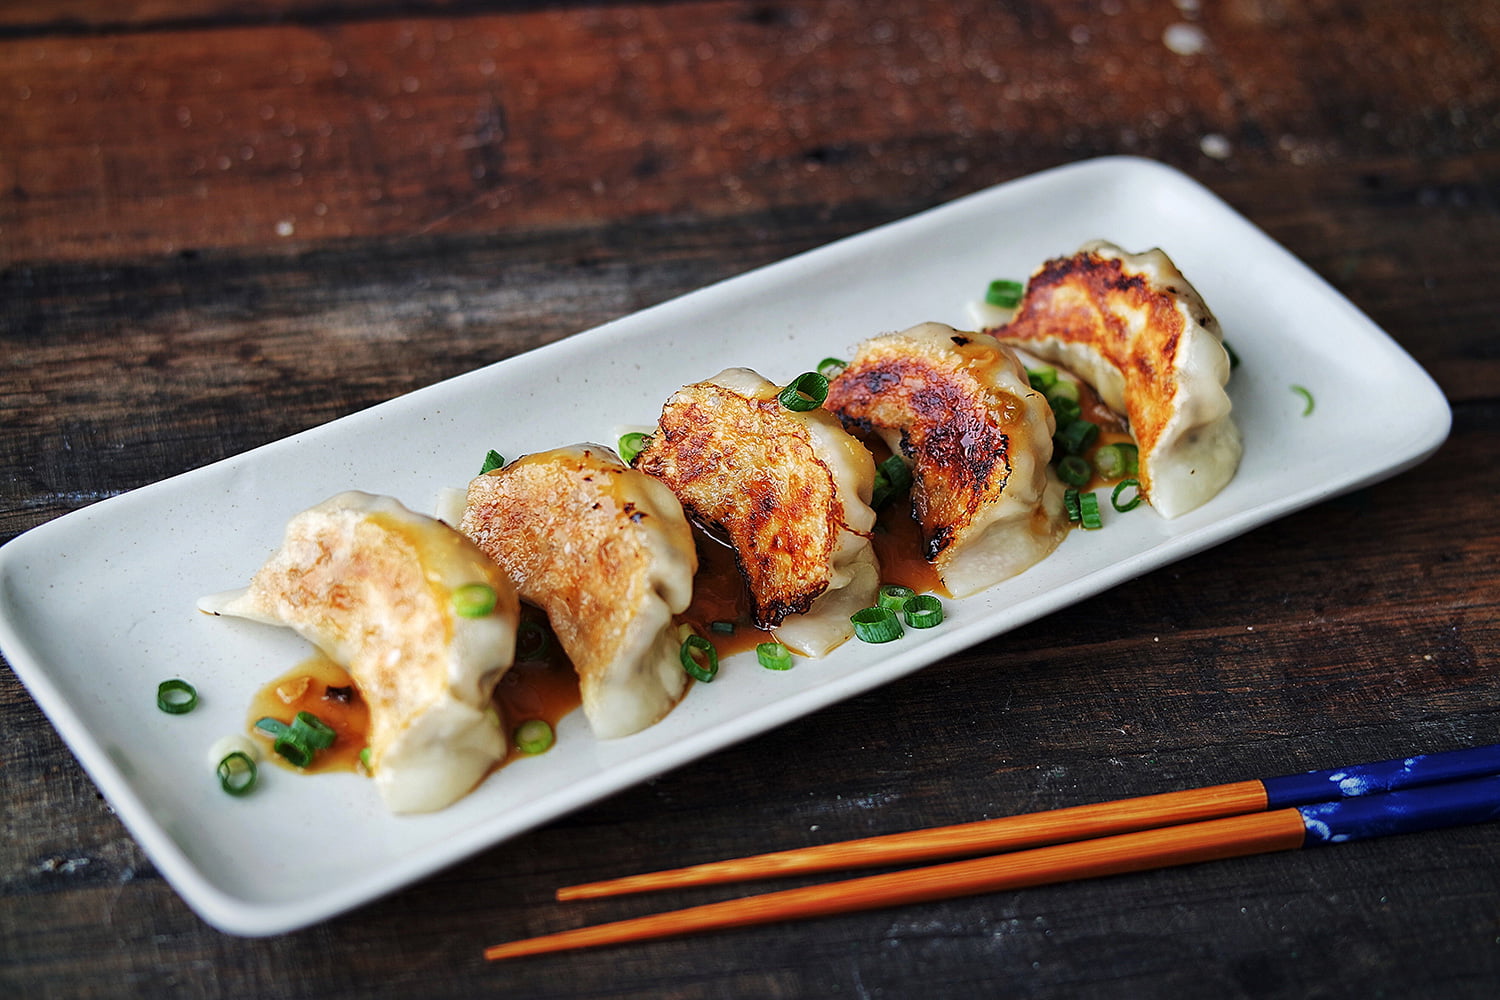 Shiitake Mushroom Gyozas, lined up on a long plate and garnished with a miso dipping sauce and finely chopped green spring onions